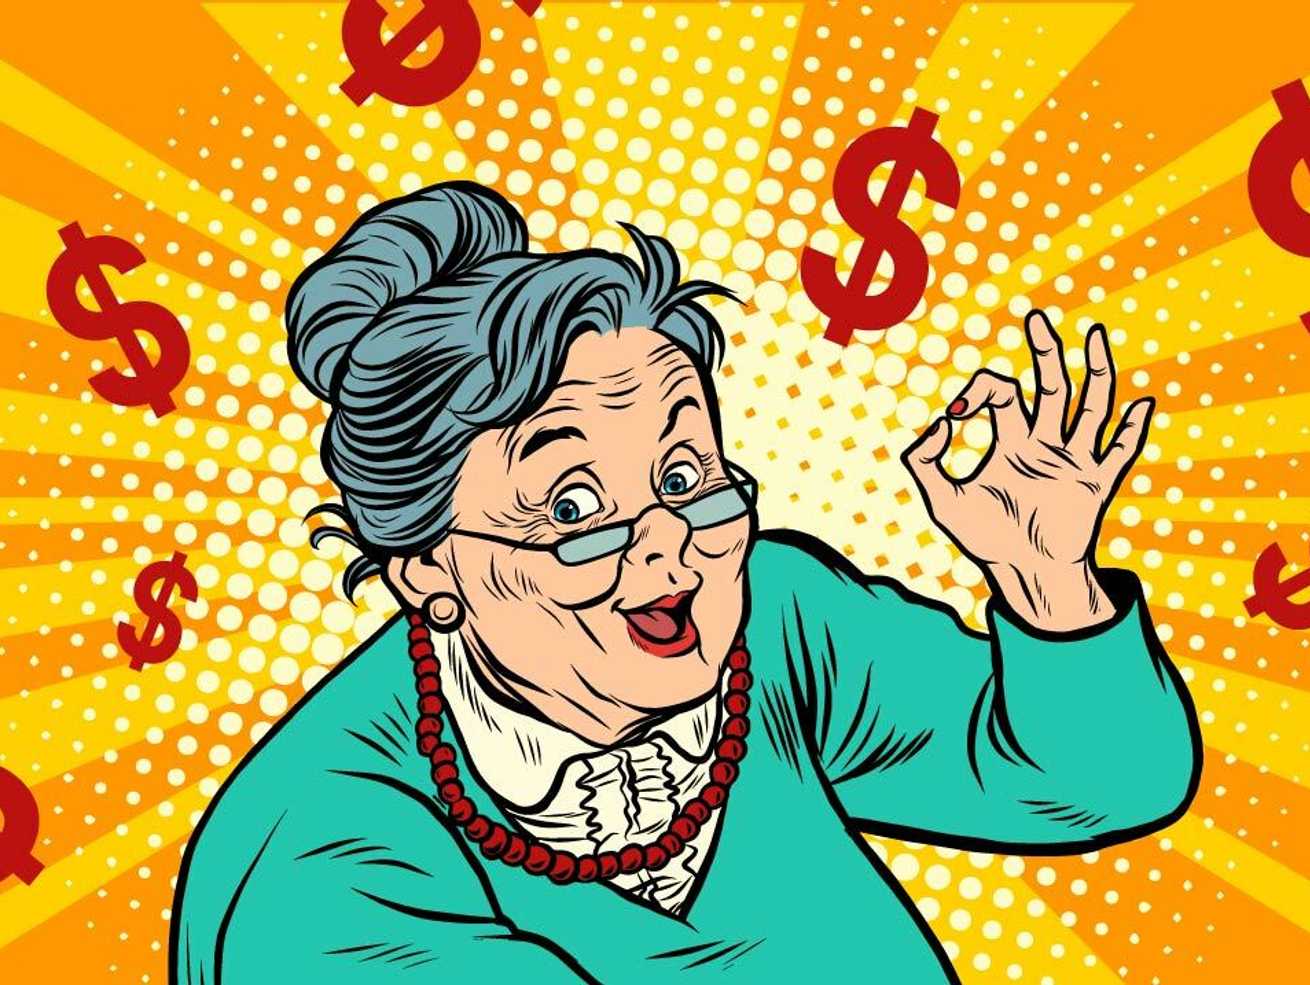 Financial Success: Listen to Your Grandmother!